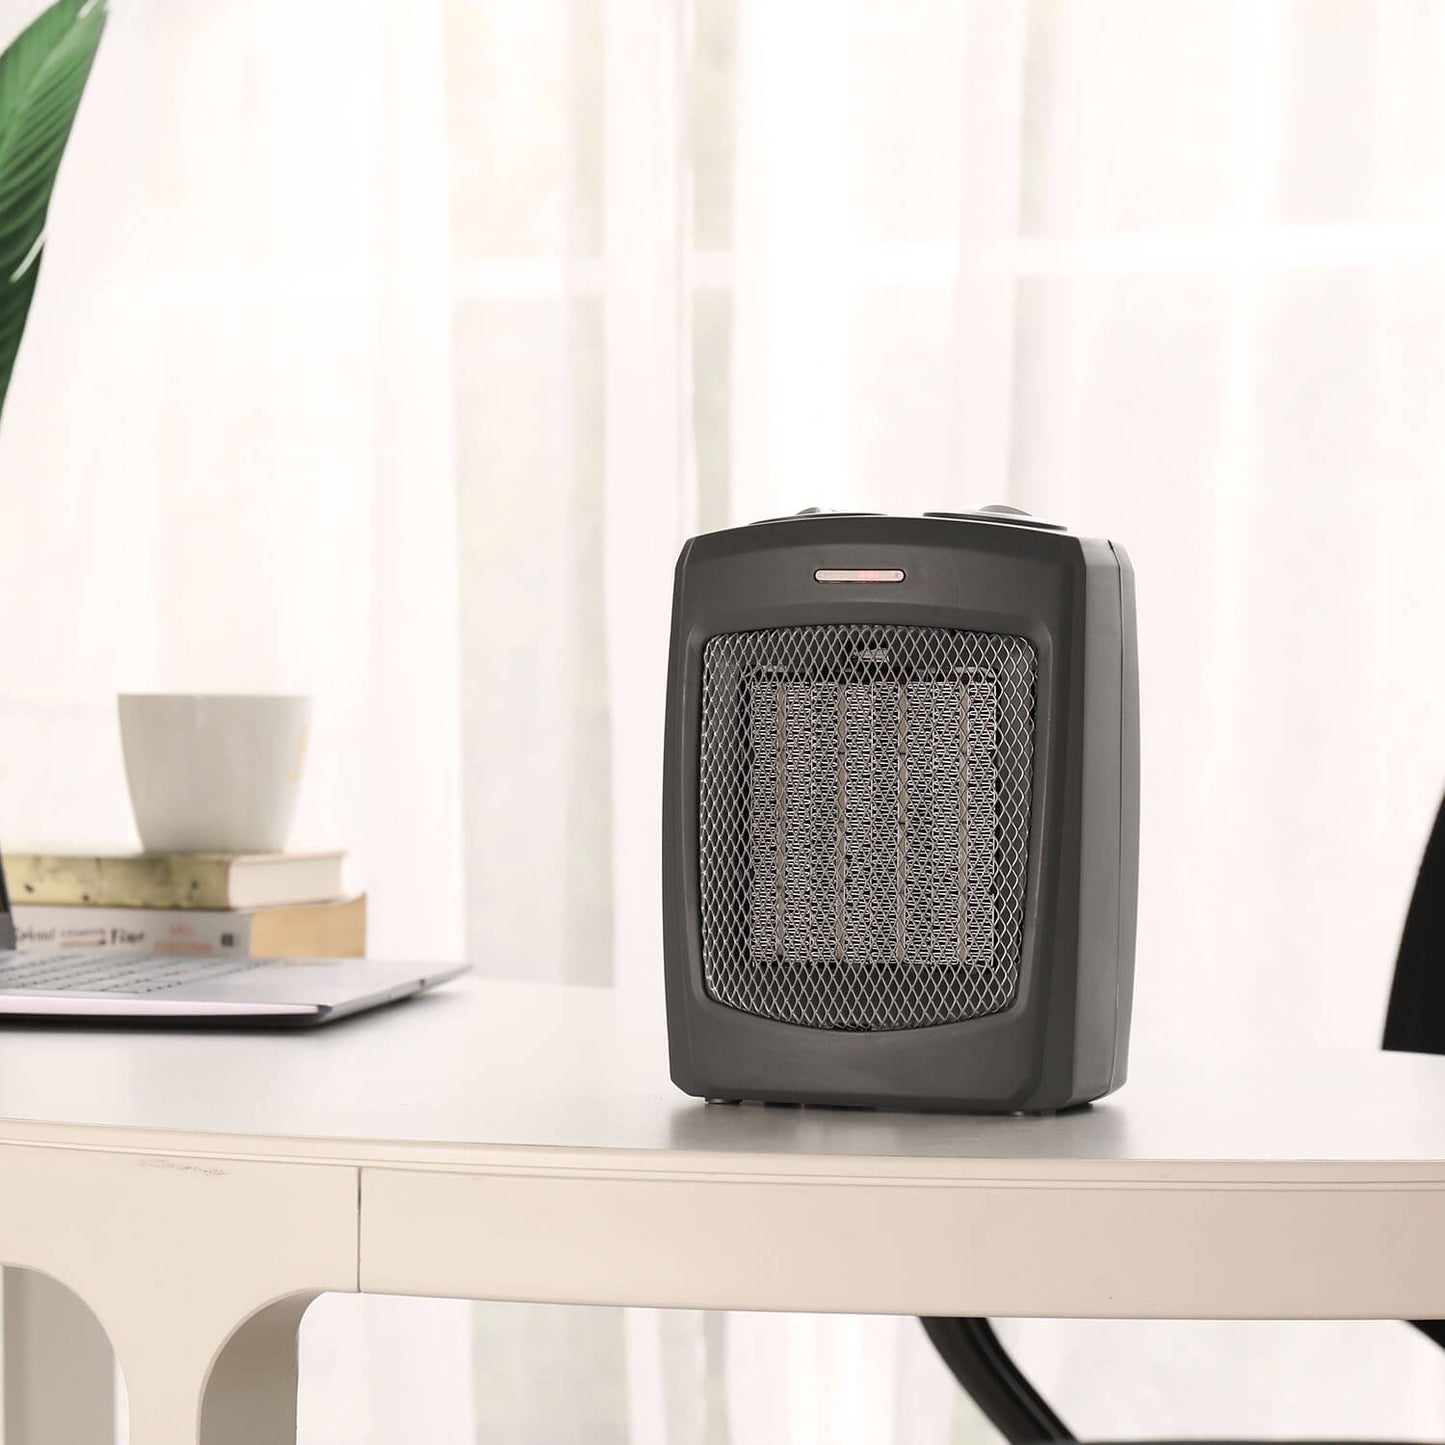 Ceramic Small Heater with Thermostat, Quiet and Compact - Grey